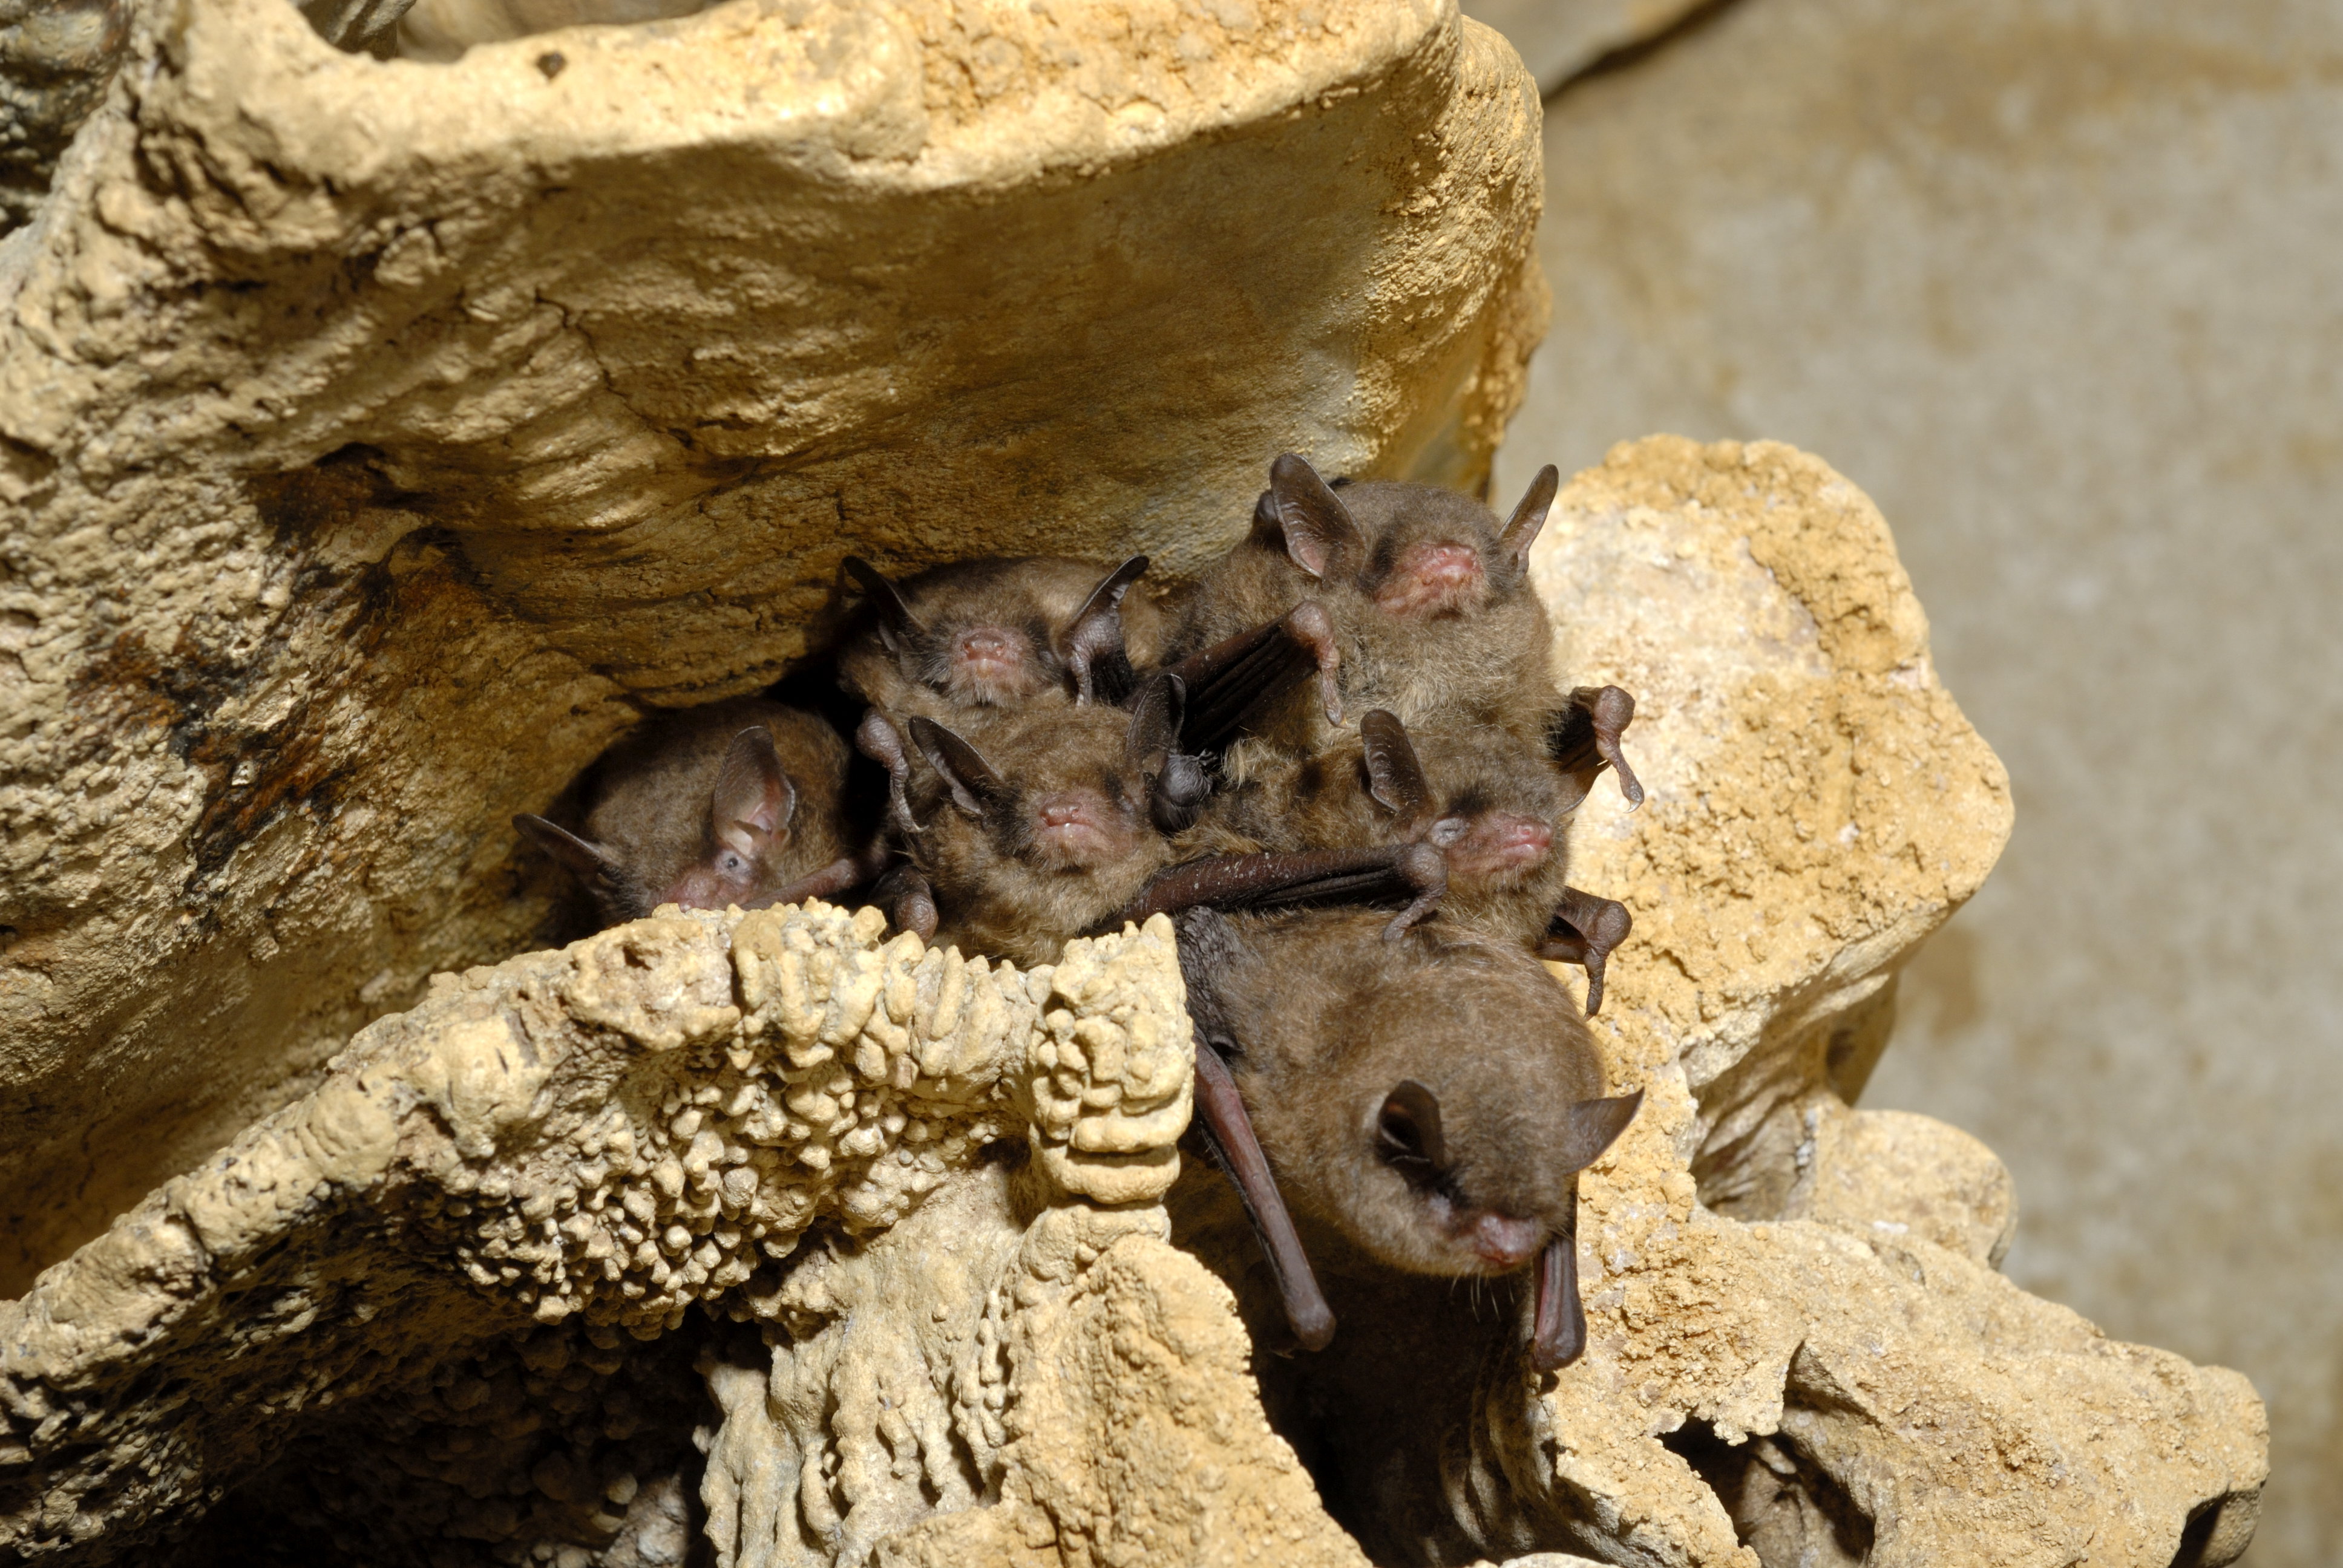 Gray bats roosting in a cave